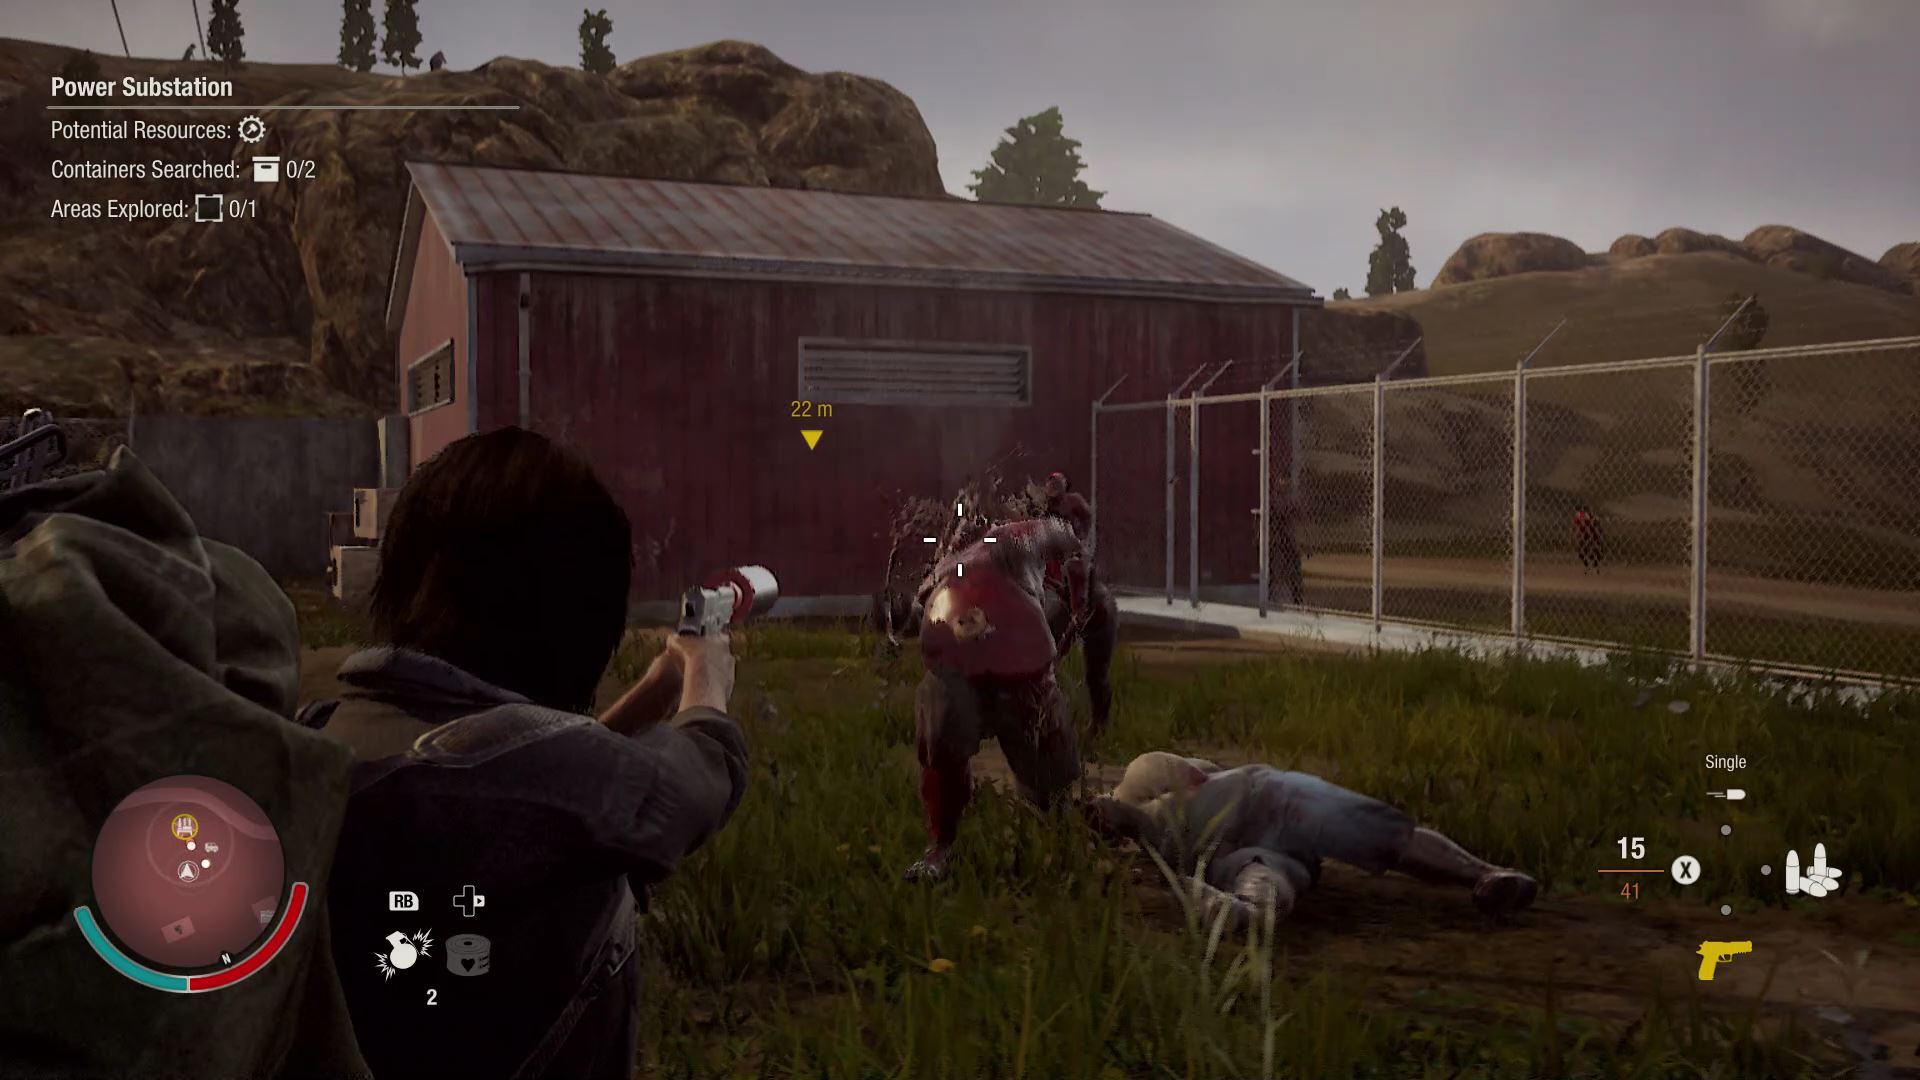 State of Decay 2, Steam, PC, PS4, Multiplayer, Gameplay, Tips, Maps,  Achievements, Bases, Armory, Addons, Weapons, Skills, Guide Unofficial on  Apple Books